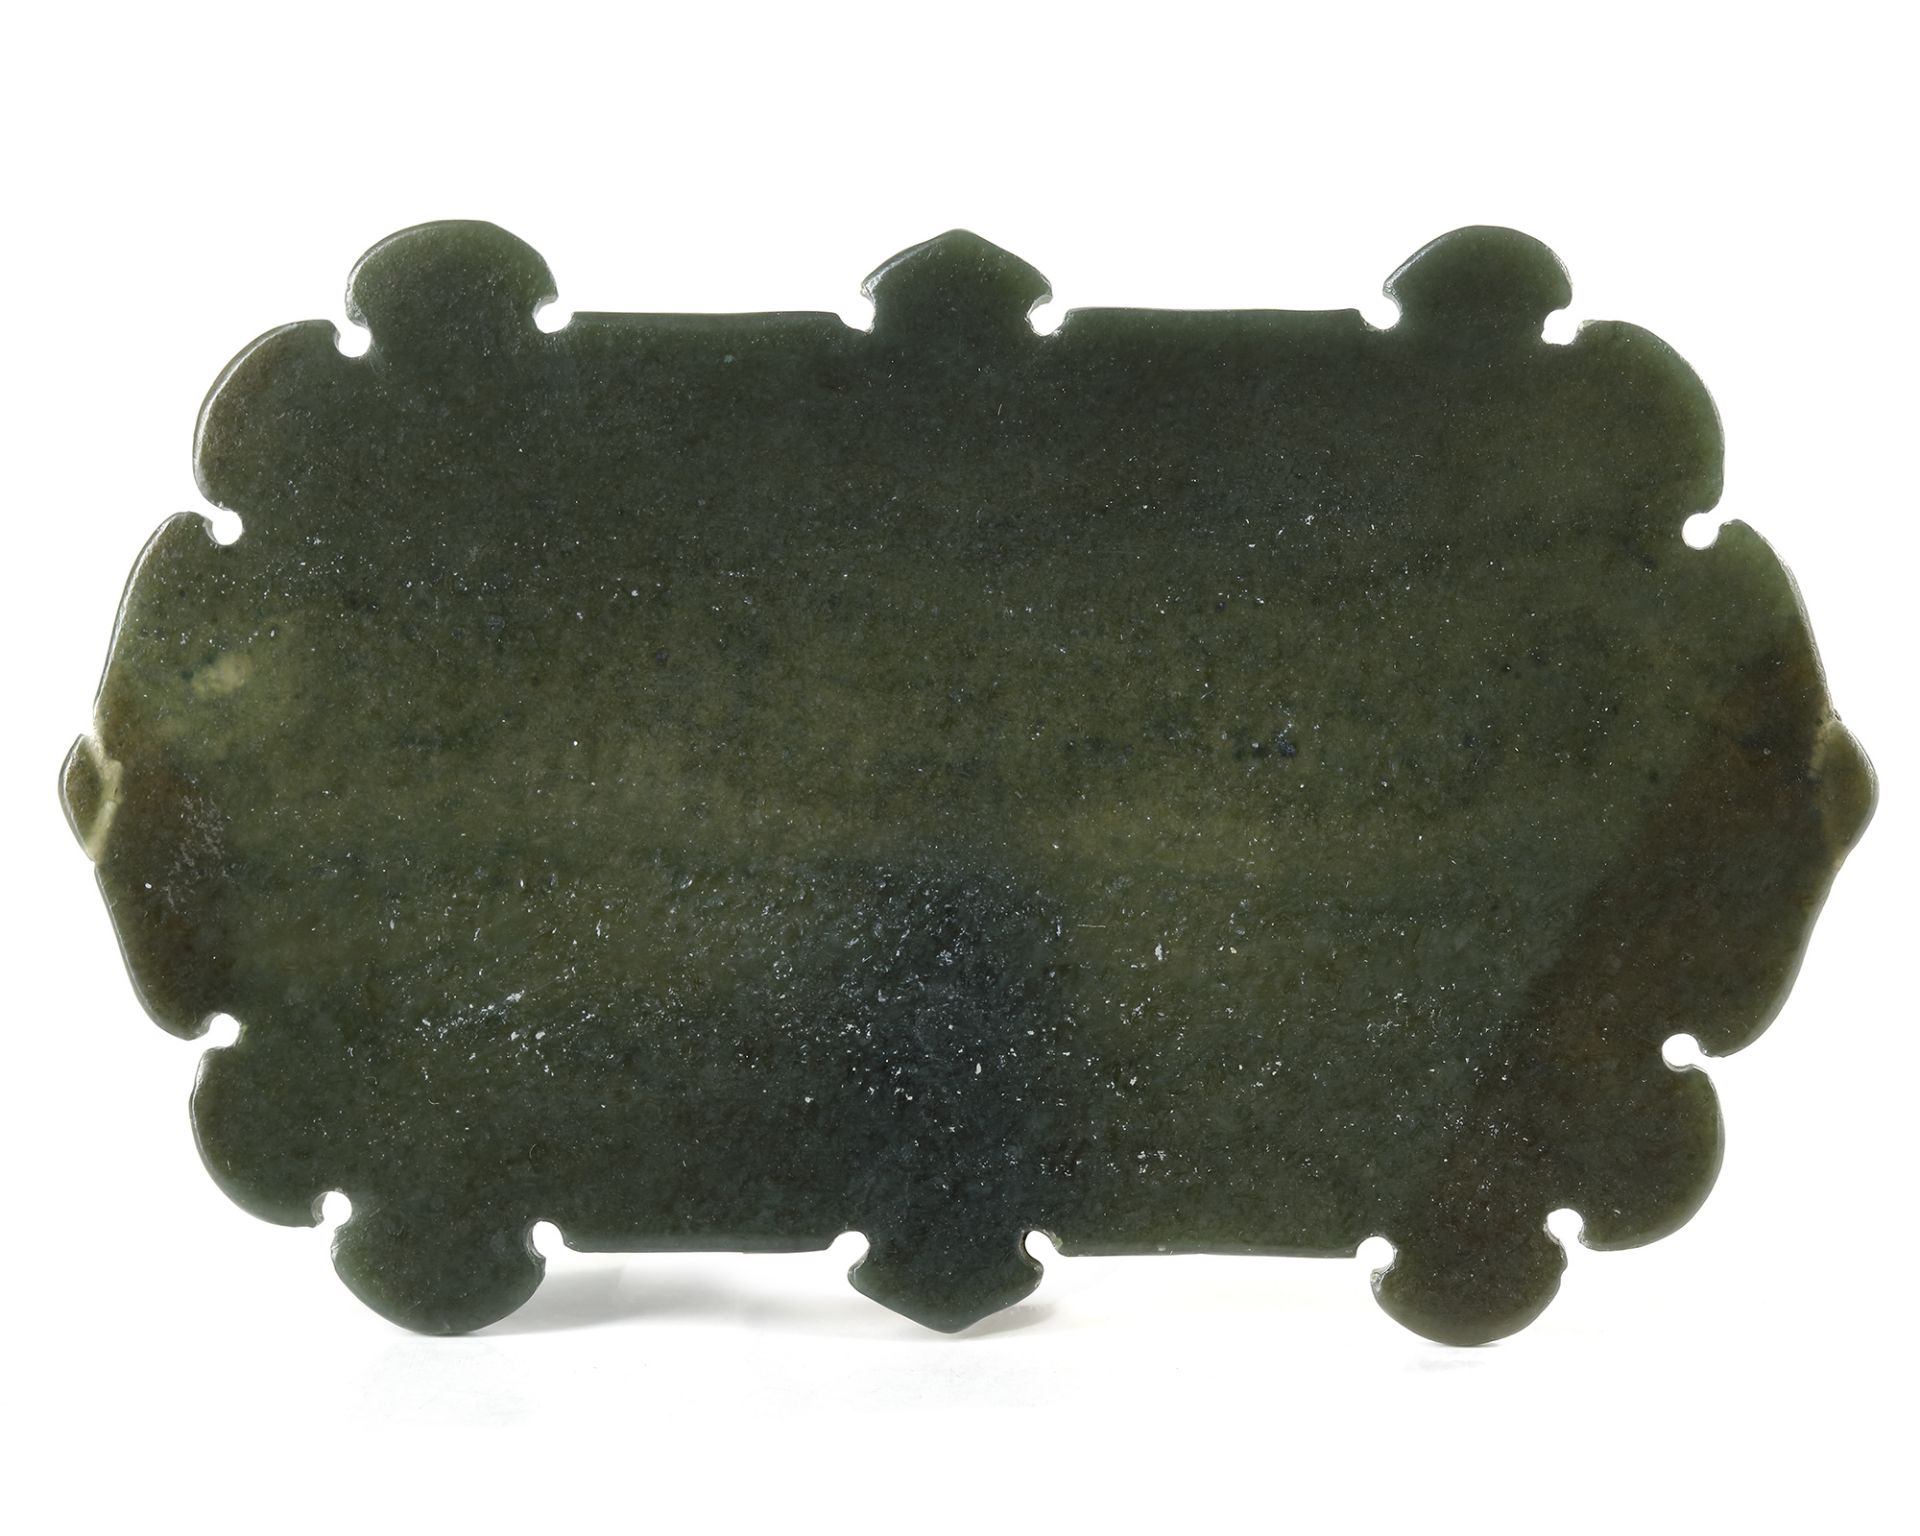 A MUGHAL JADE AMULET, NORTHERN INDIA, 18TH CENTURY - Image 2 of 2